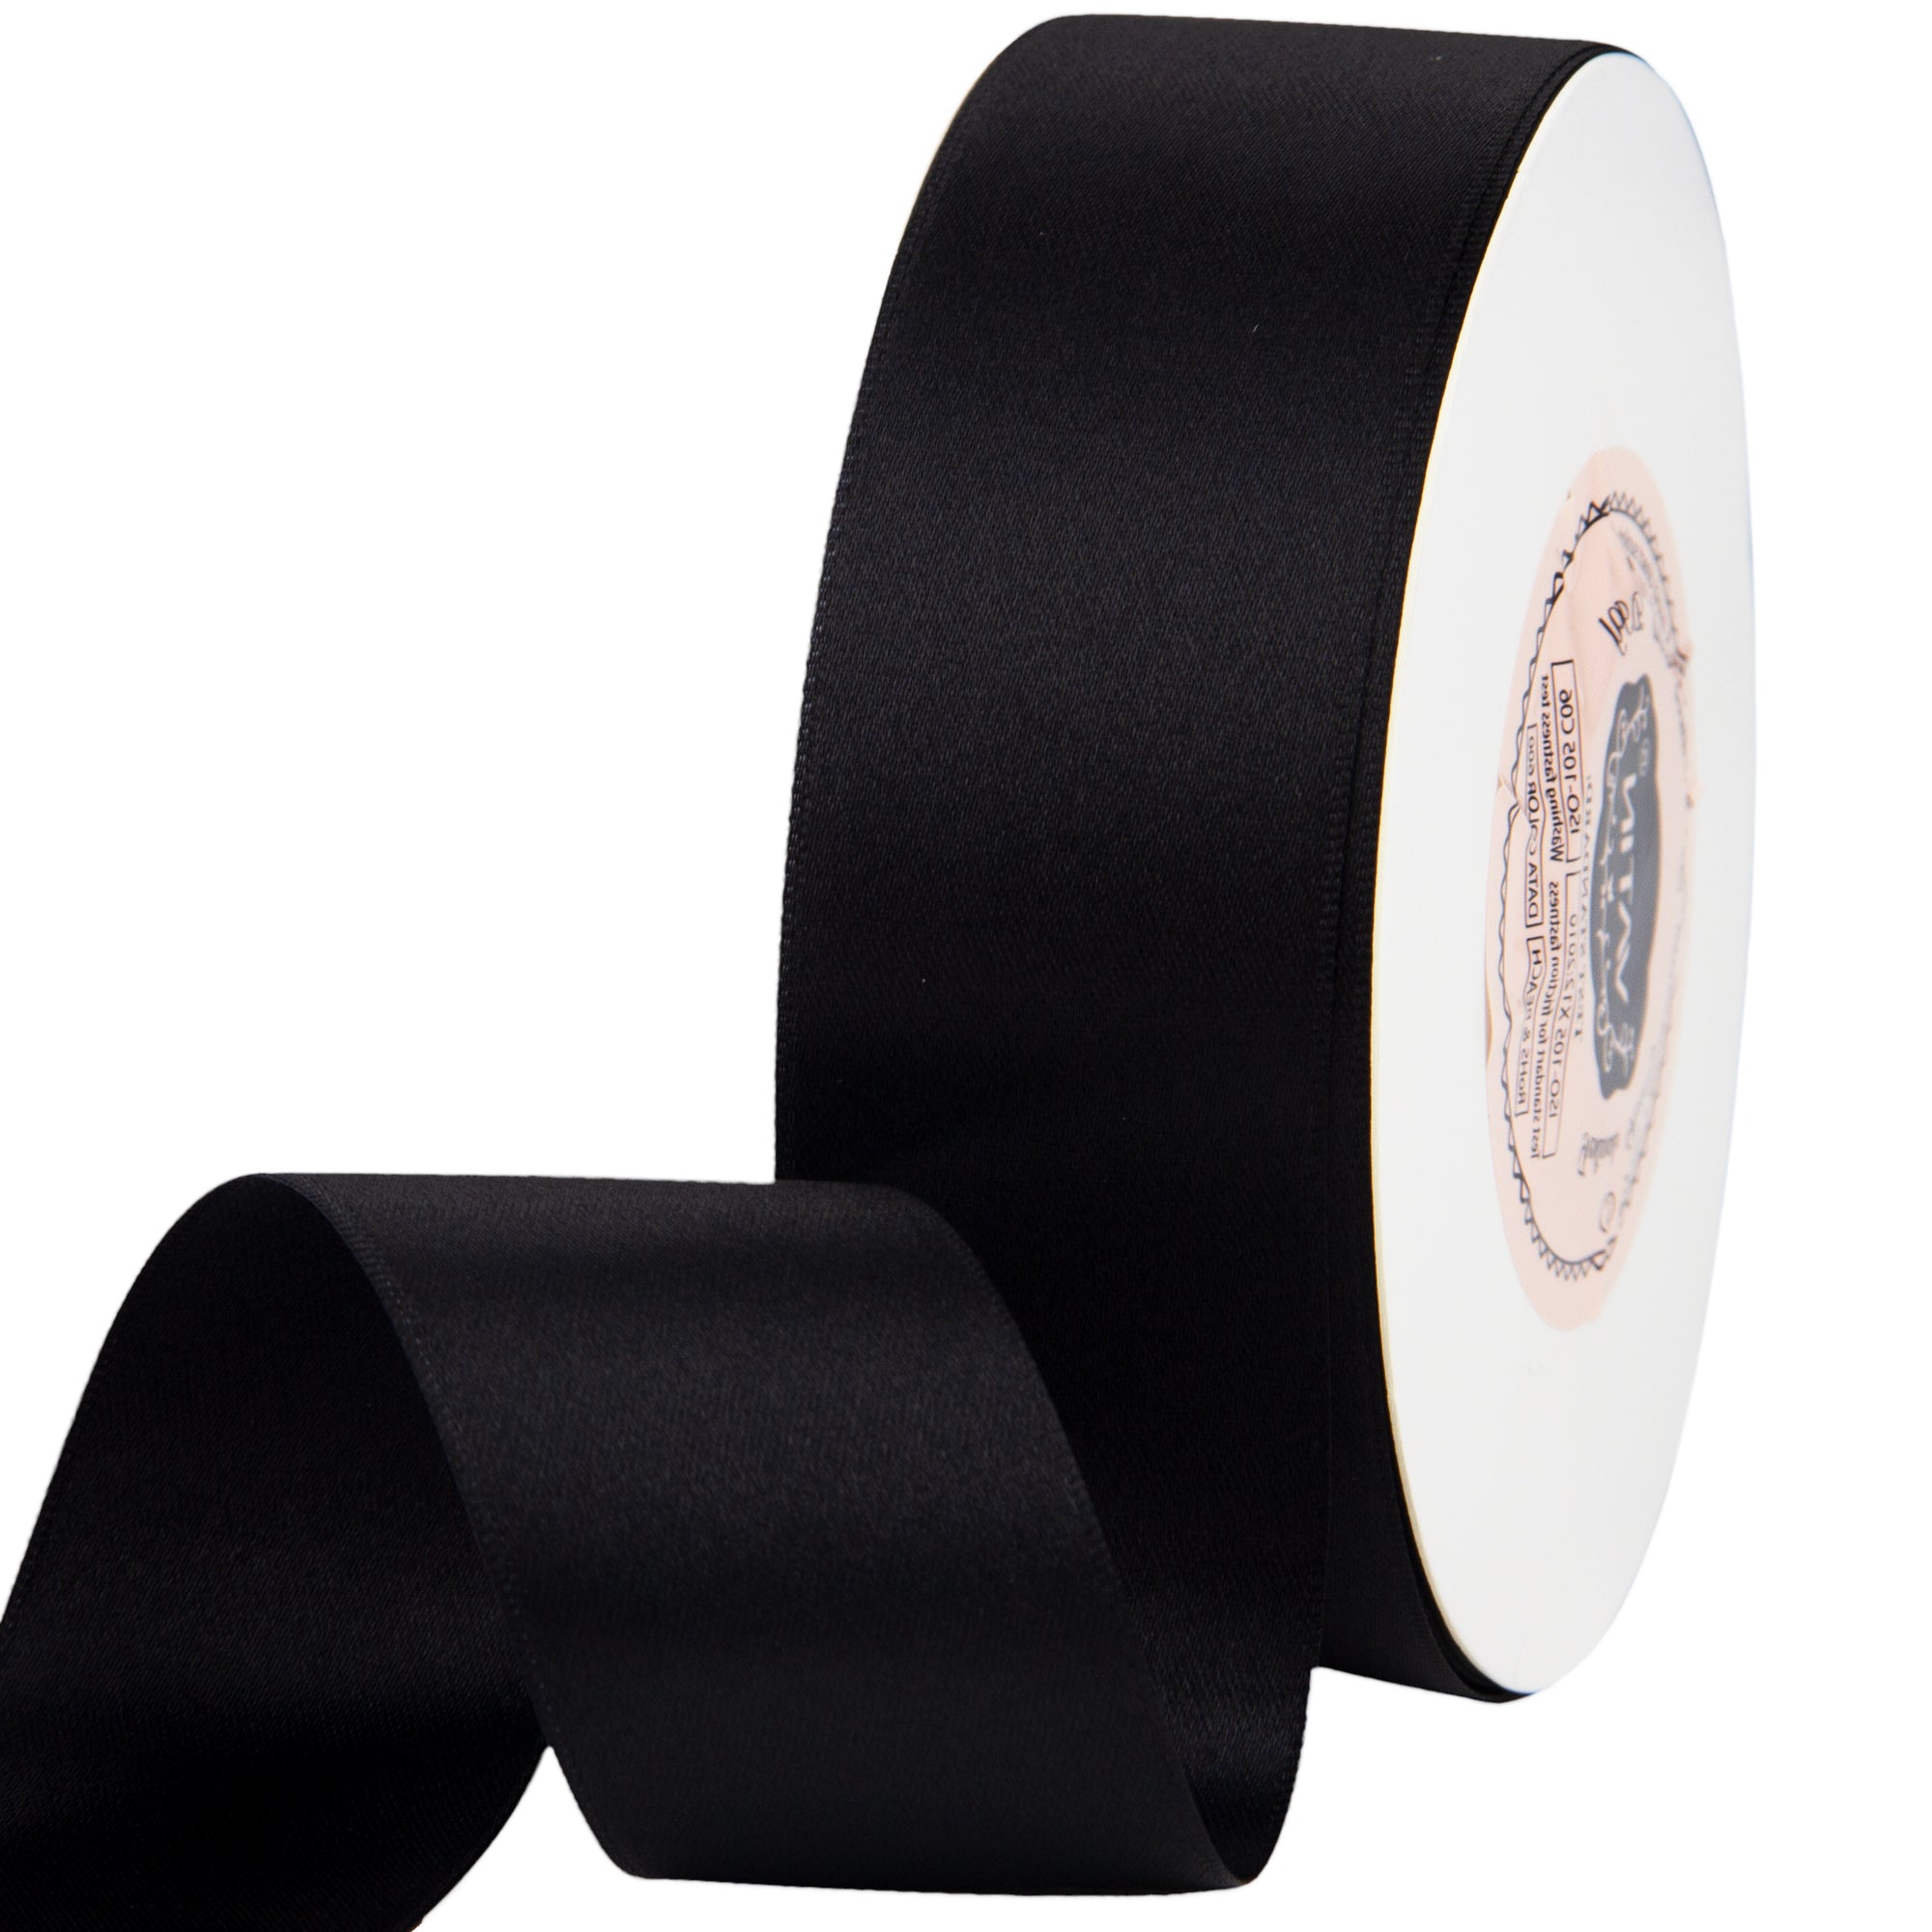 VATIN 1-1/2 inch Wide Double Face Solid Satin Ribbon Roll - 50